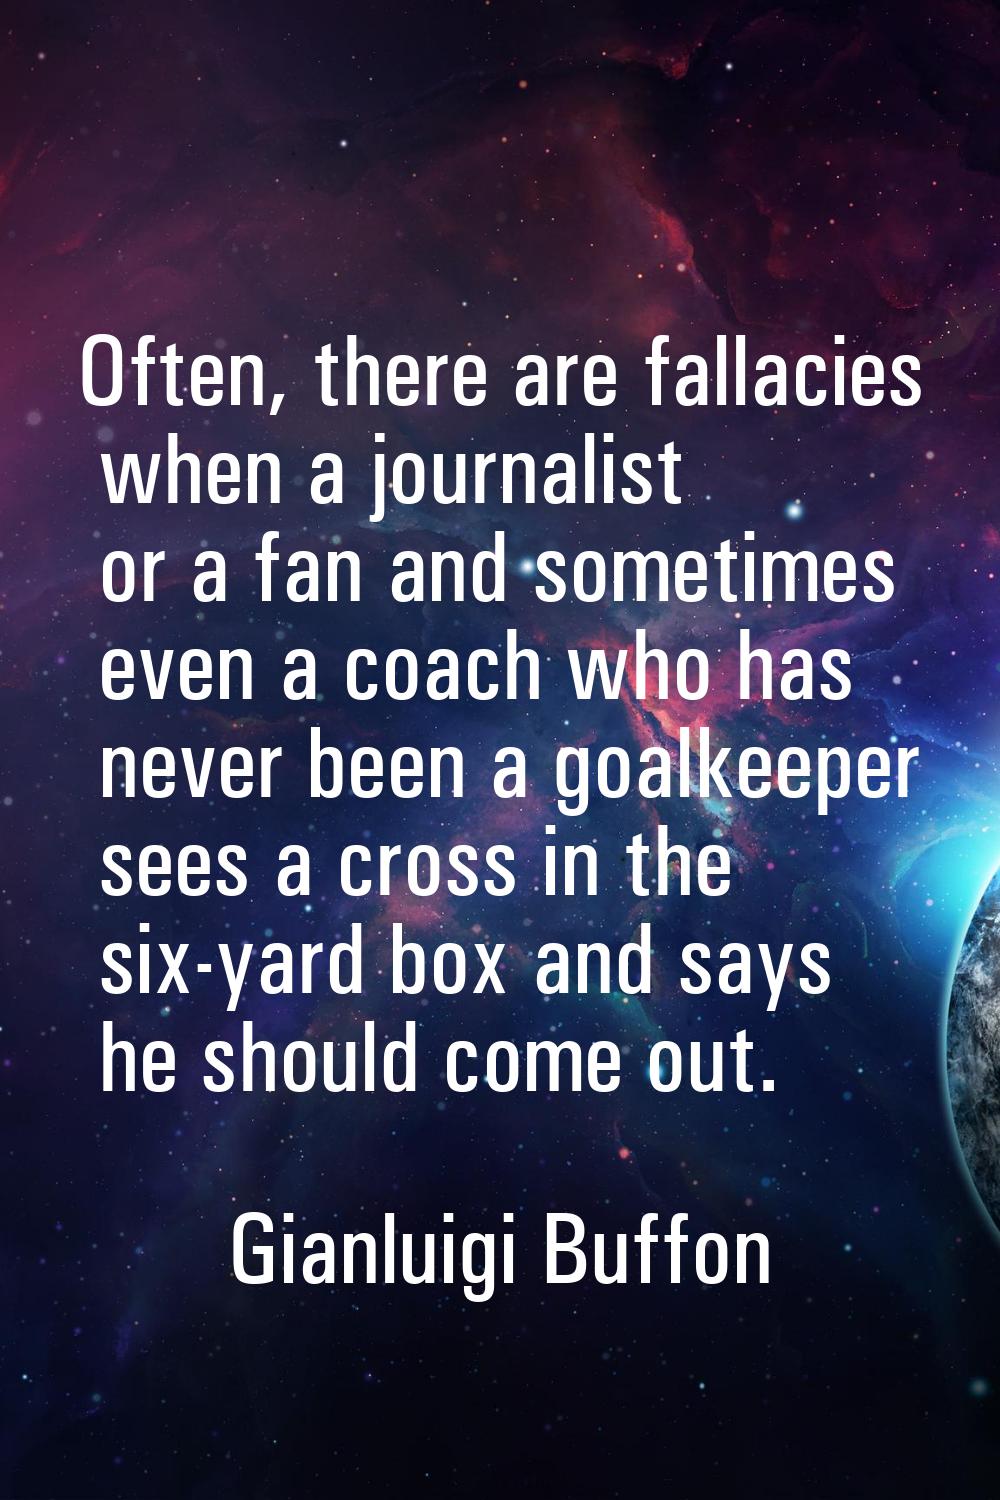 Often, there are fallacies when a journalist or a fan and sometimes even a coach who has never been